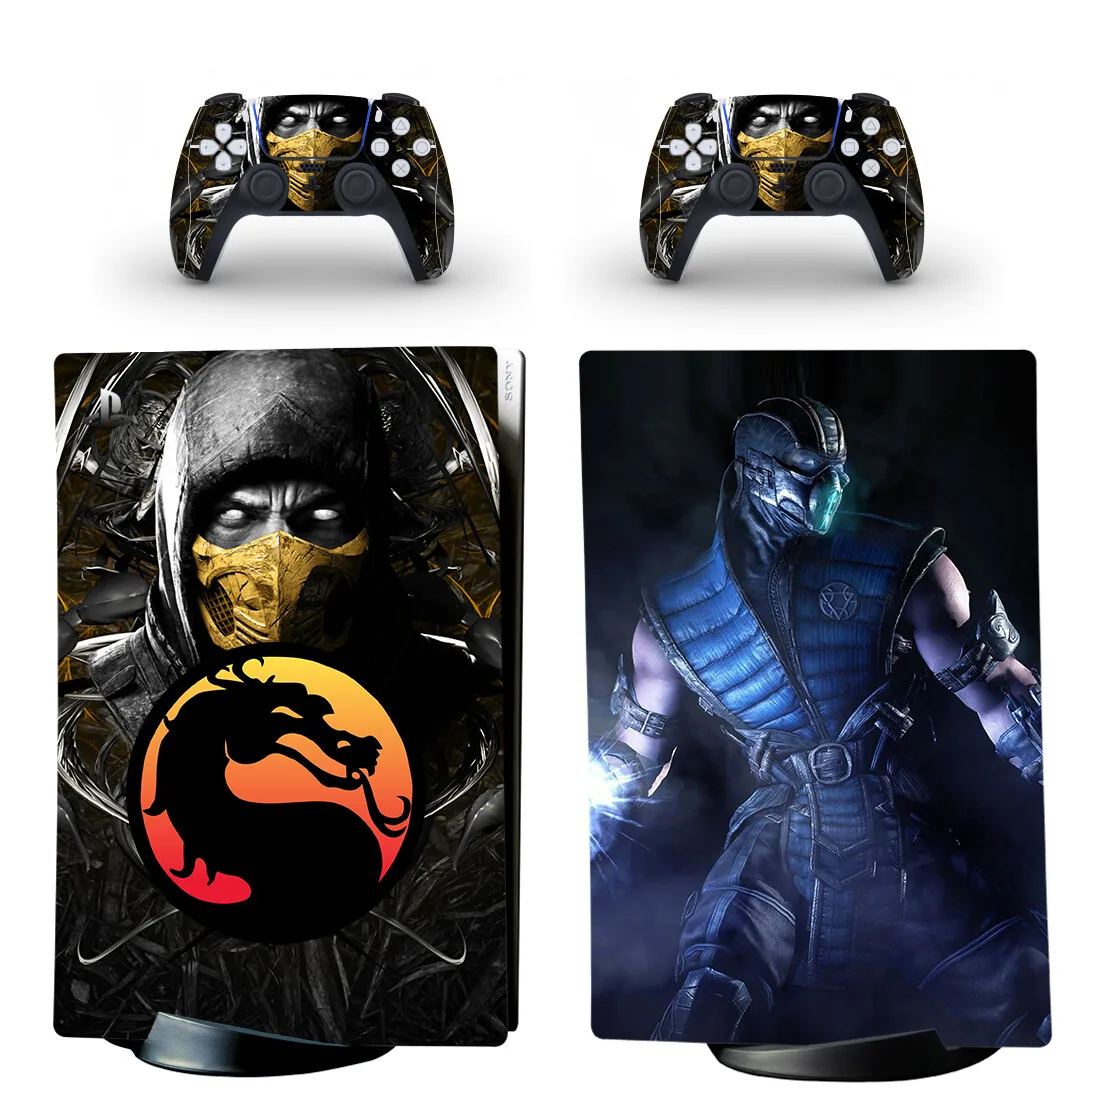 

Mortal Kombat PS5 Digital Edition Skin Sticker Decal Cover for PlayStation 5 Console and Controllers PS5 Skin Sticker Vinyl